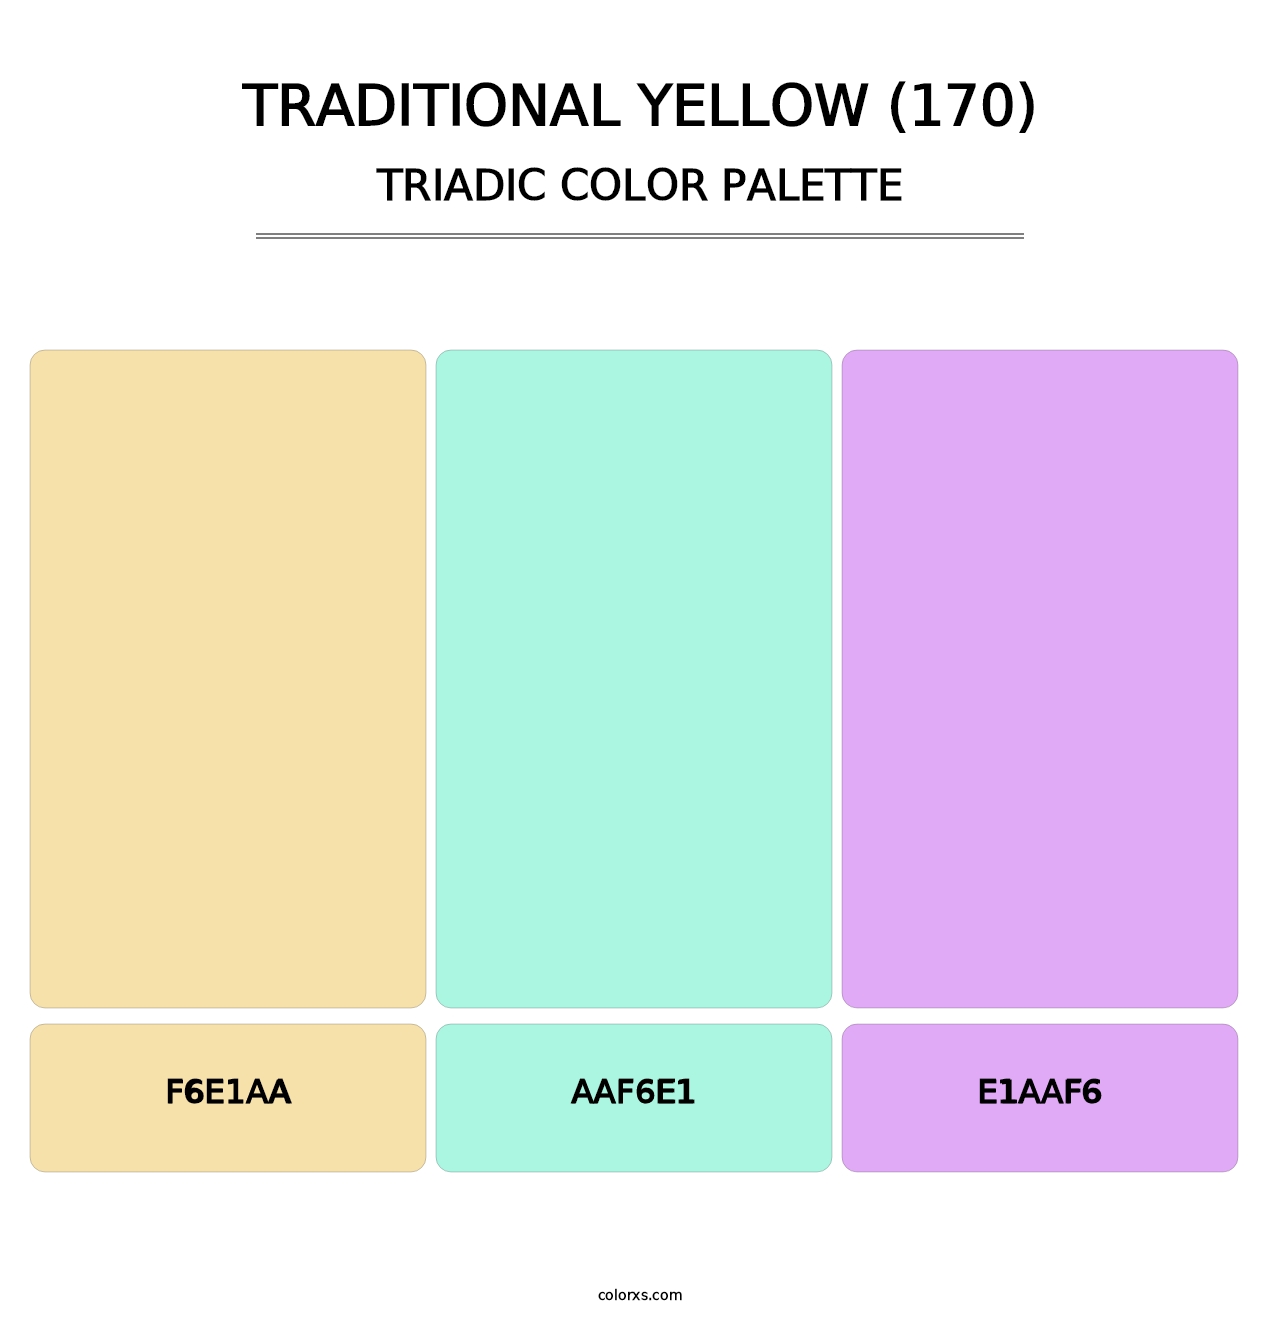 Traditional Yellow (170) - Triadic Color Palette